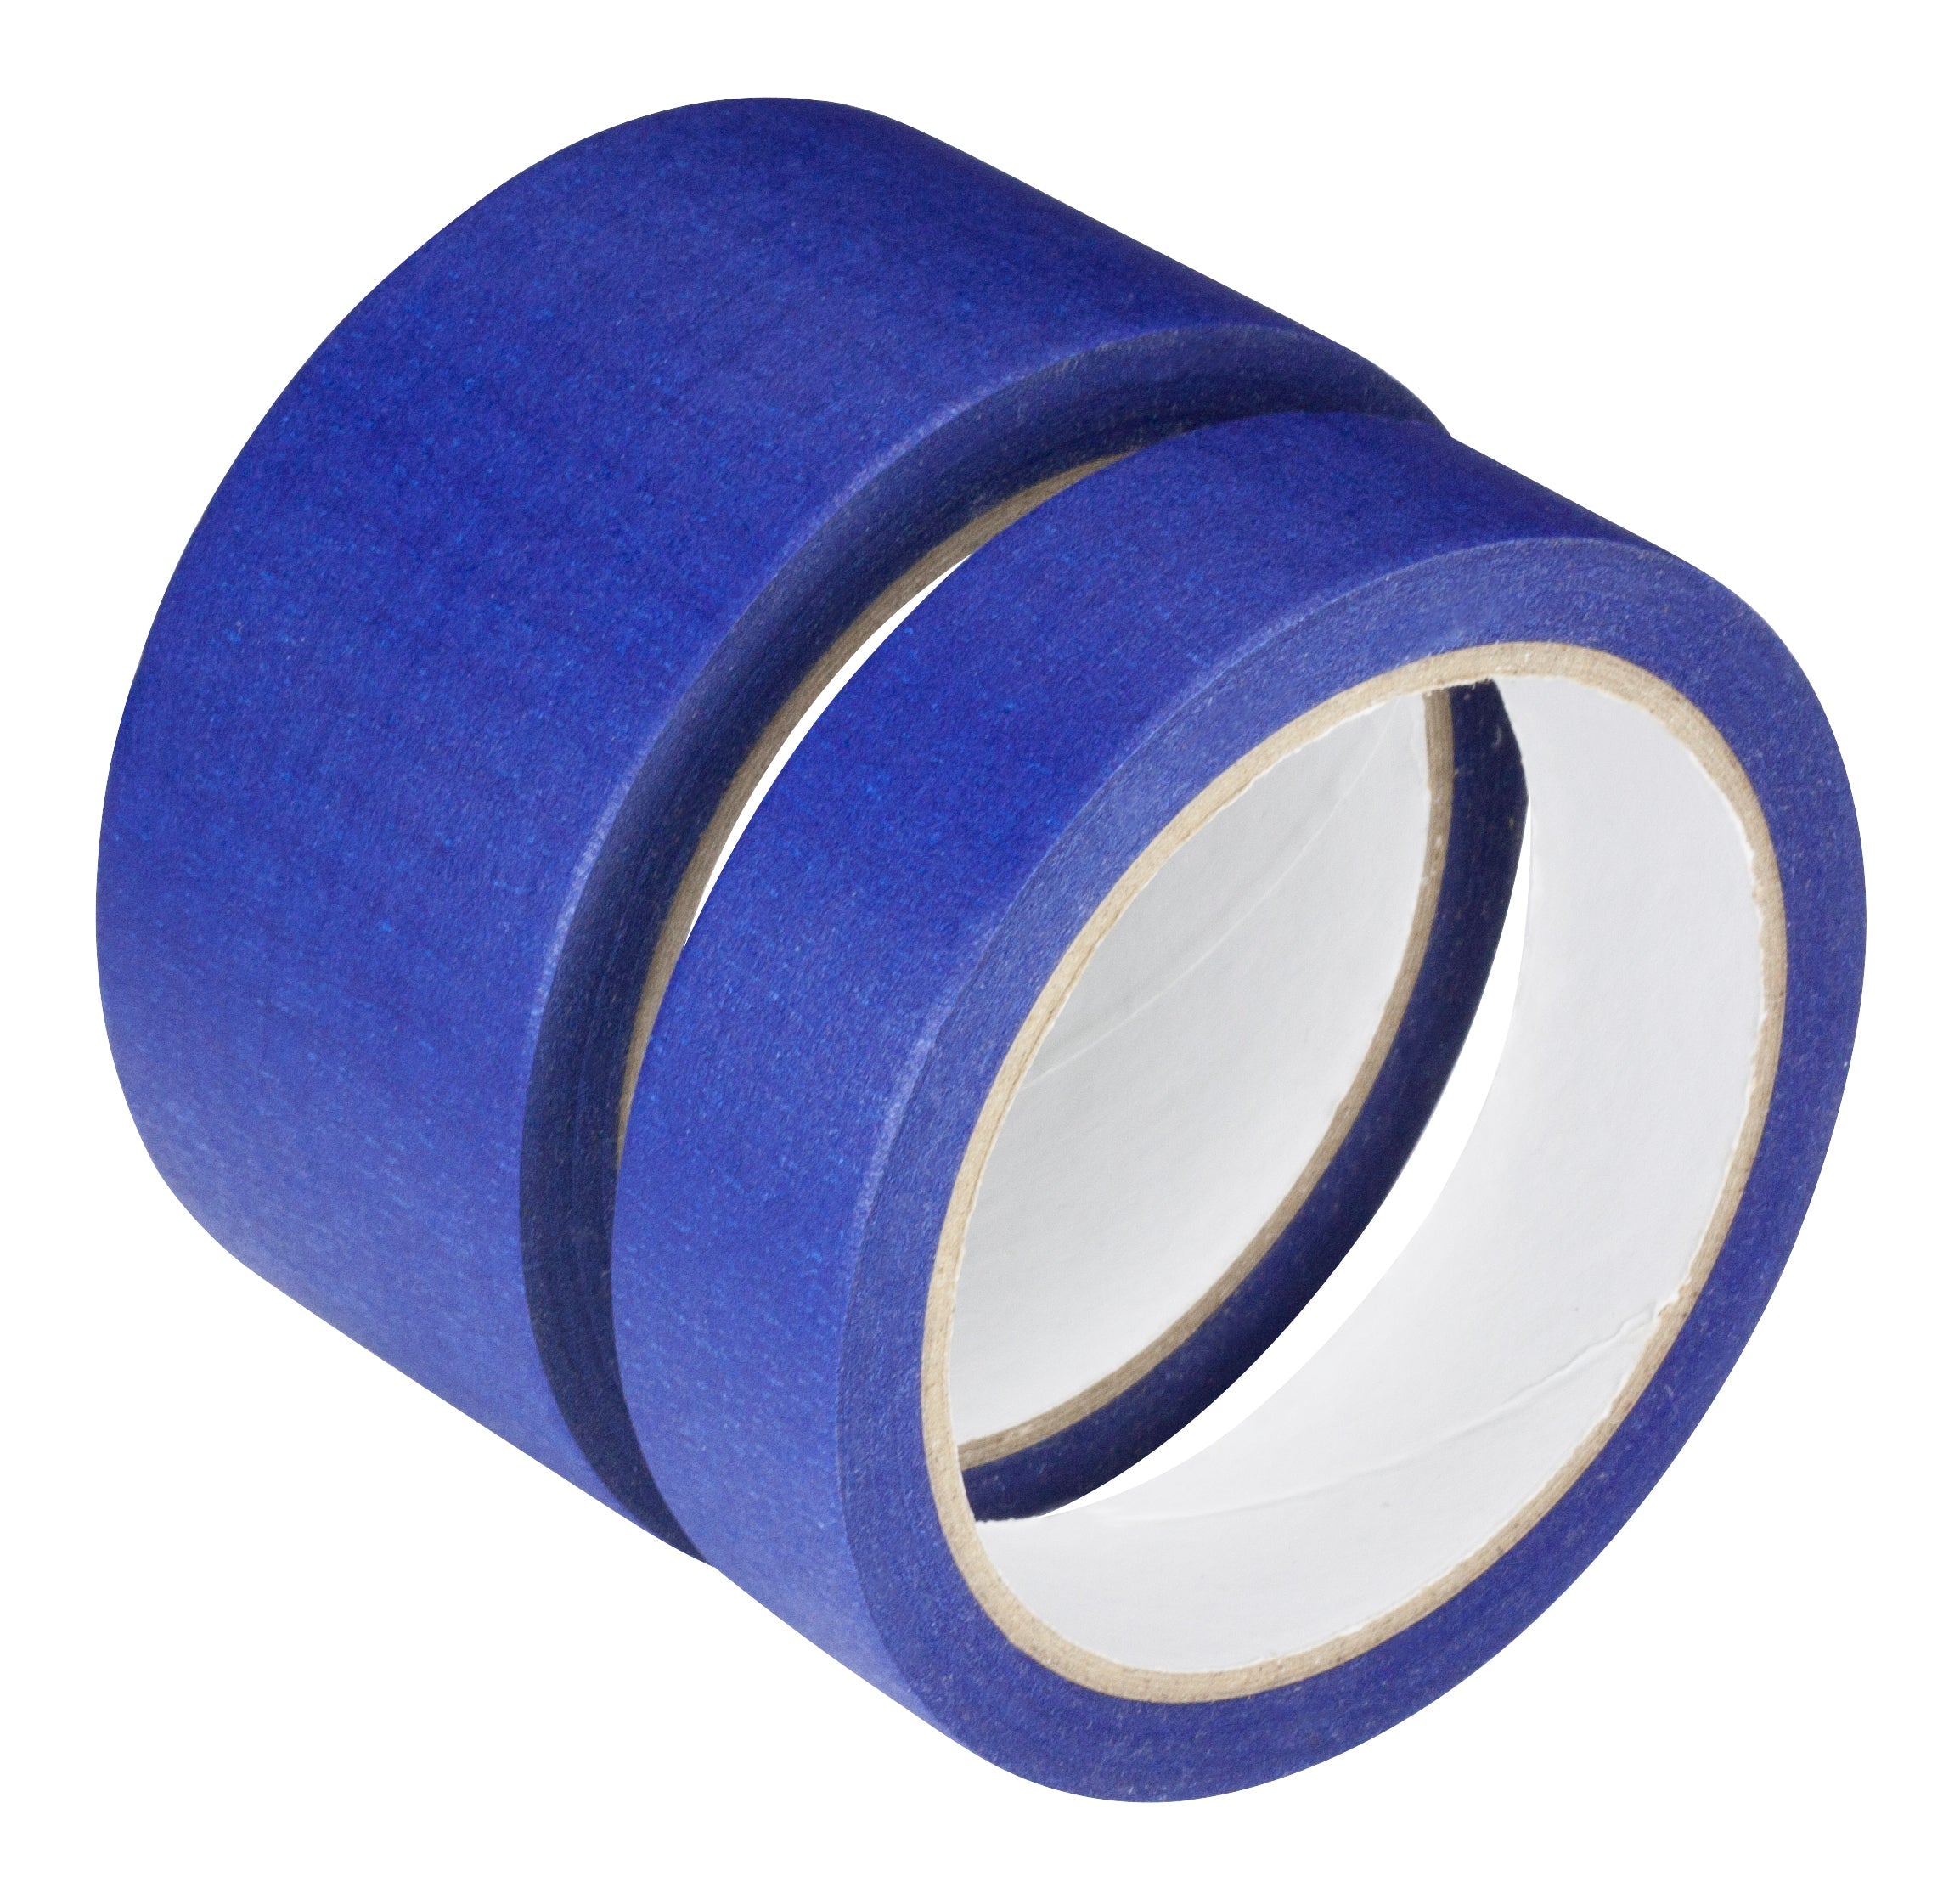 Masking Tape 25mm x 25m (Premium Quality) 0.12mm Thickness BLUE, UV Rated - Per Pack